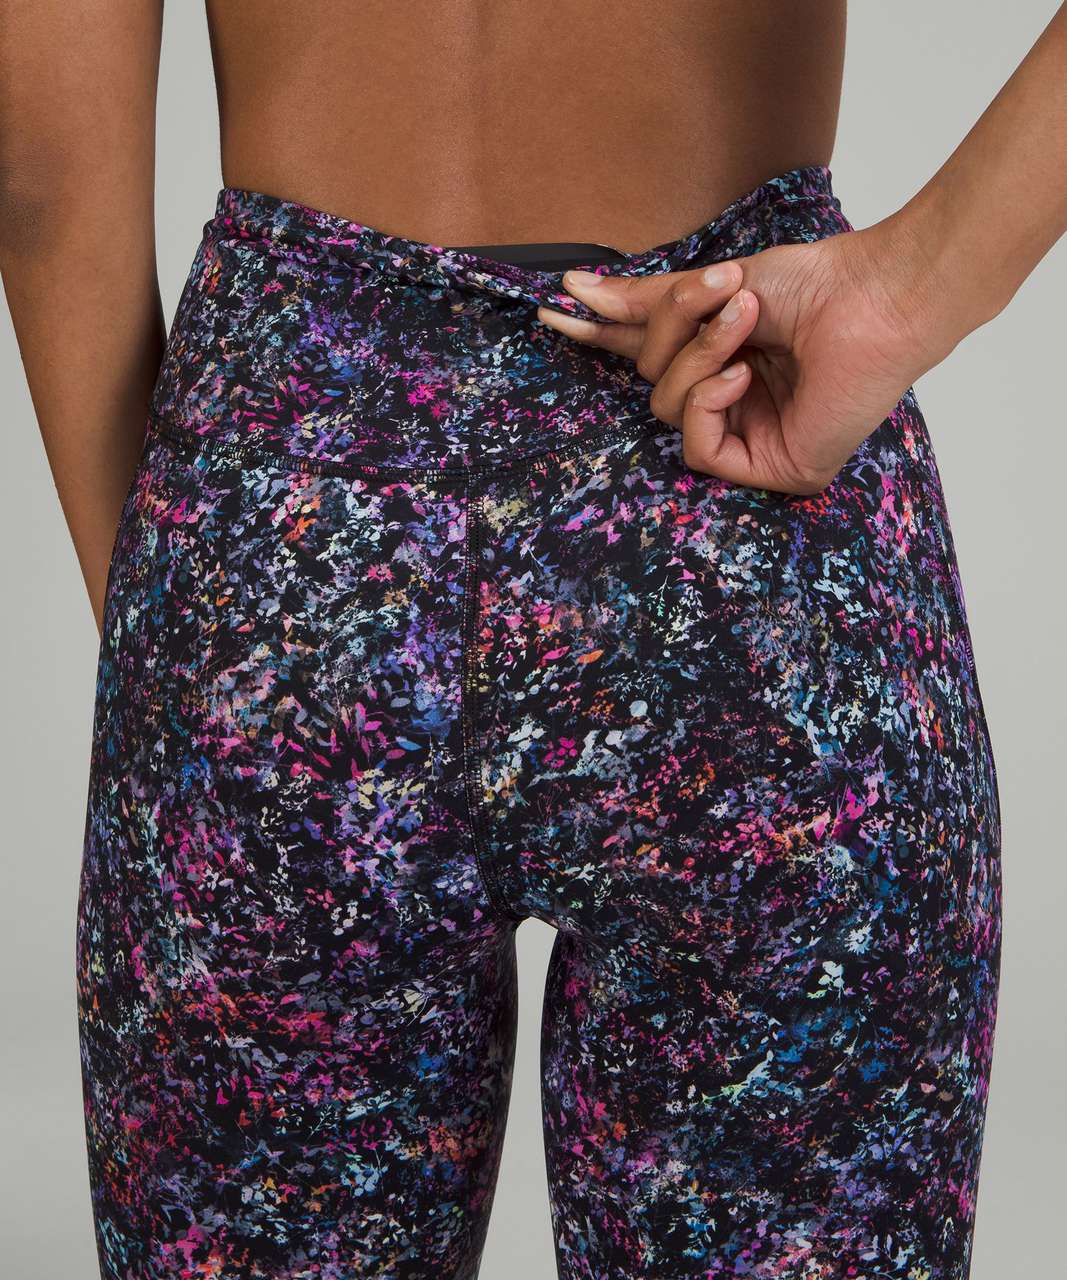 Lululemon Base Pace High-Rise Running Tight 28" - Floral Spray Multi